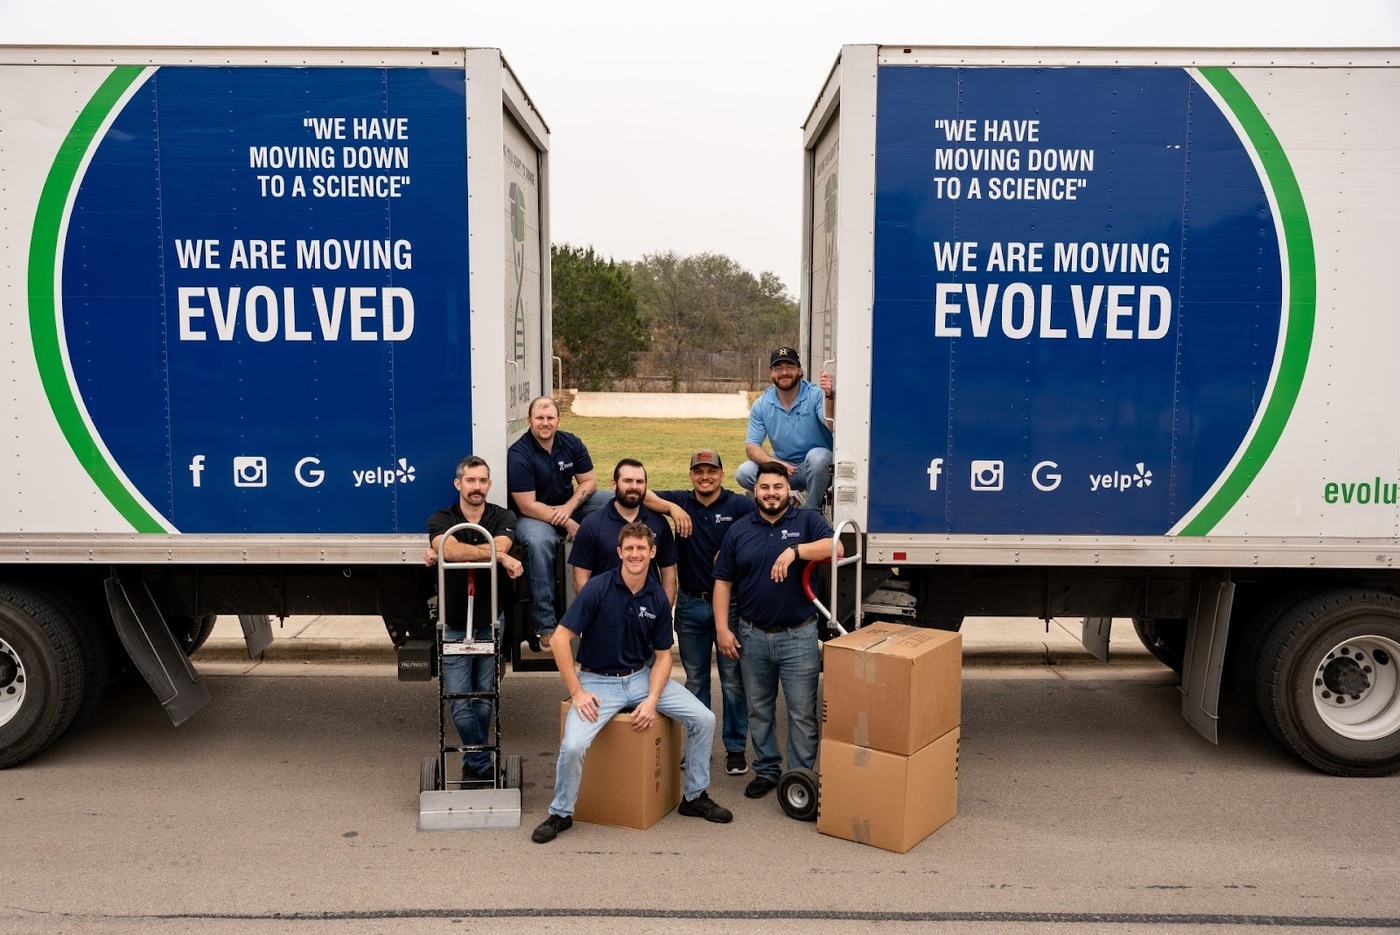 Evolution Moving Company San Antonio was first started in New Braunfels, TX, and has expanded to several areas, including Schertz, Dallas, Richardson, Garland, San Antonio, Converse, Saginaw, Haltom City, North Richland Hills, Fort Worth, and Austin in Texas.